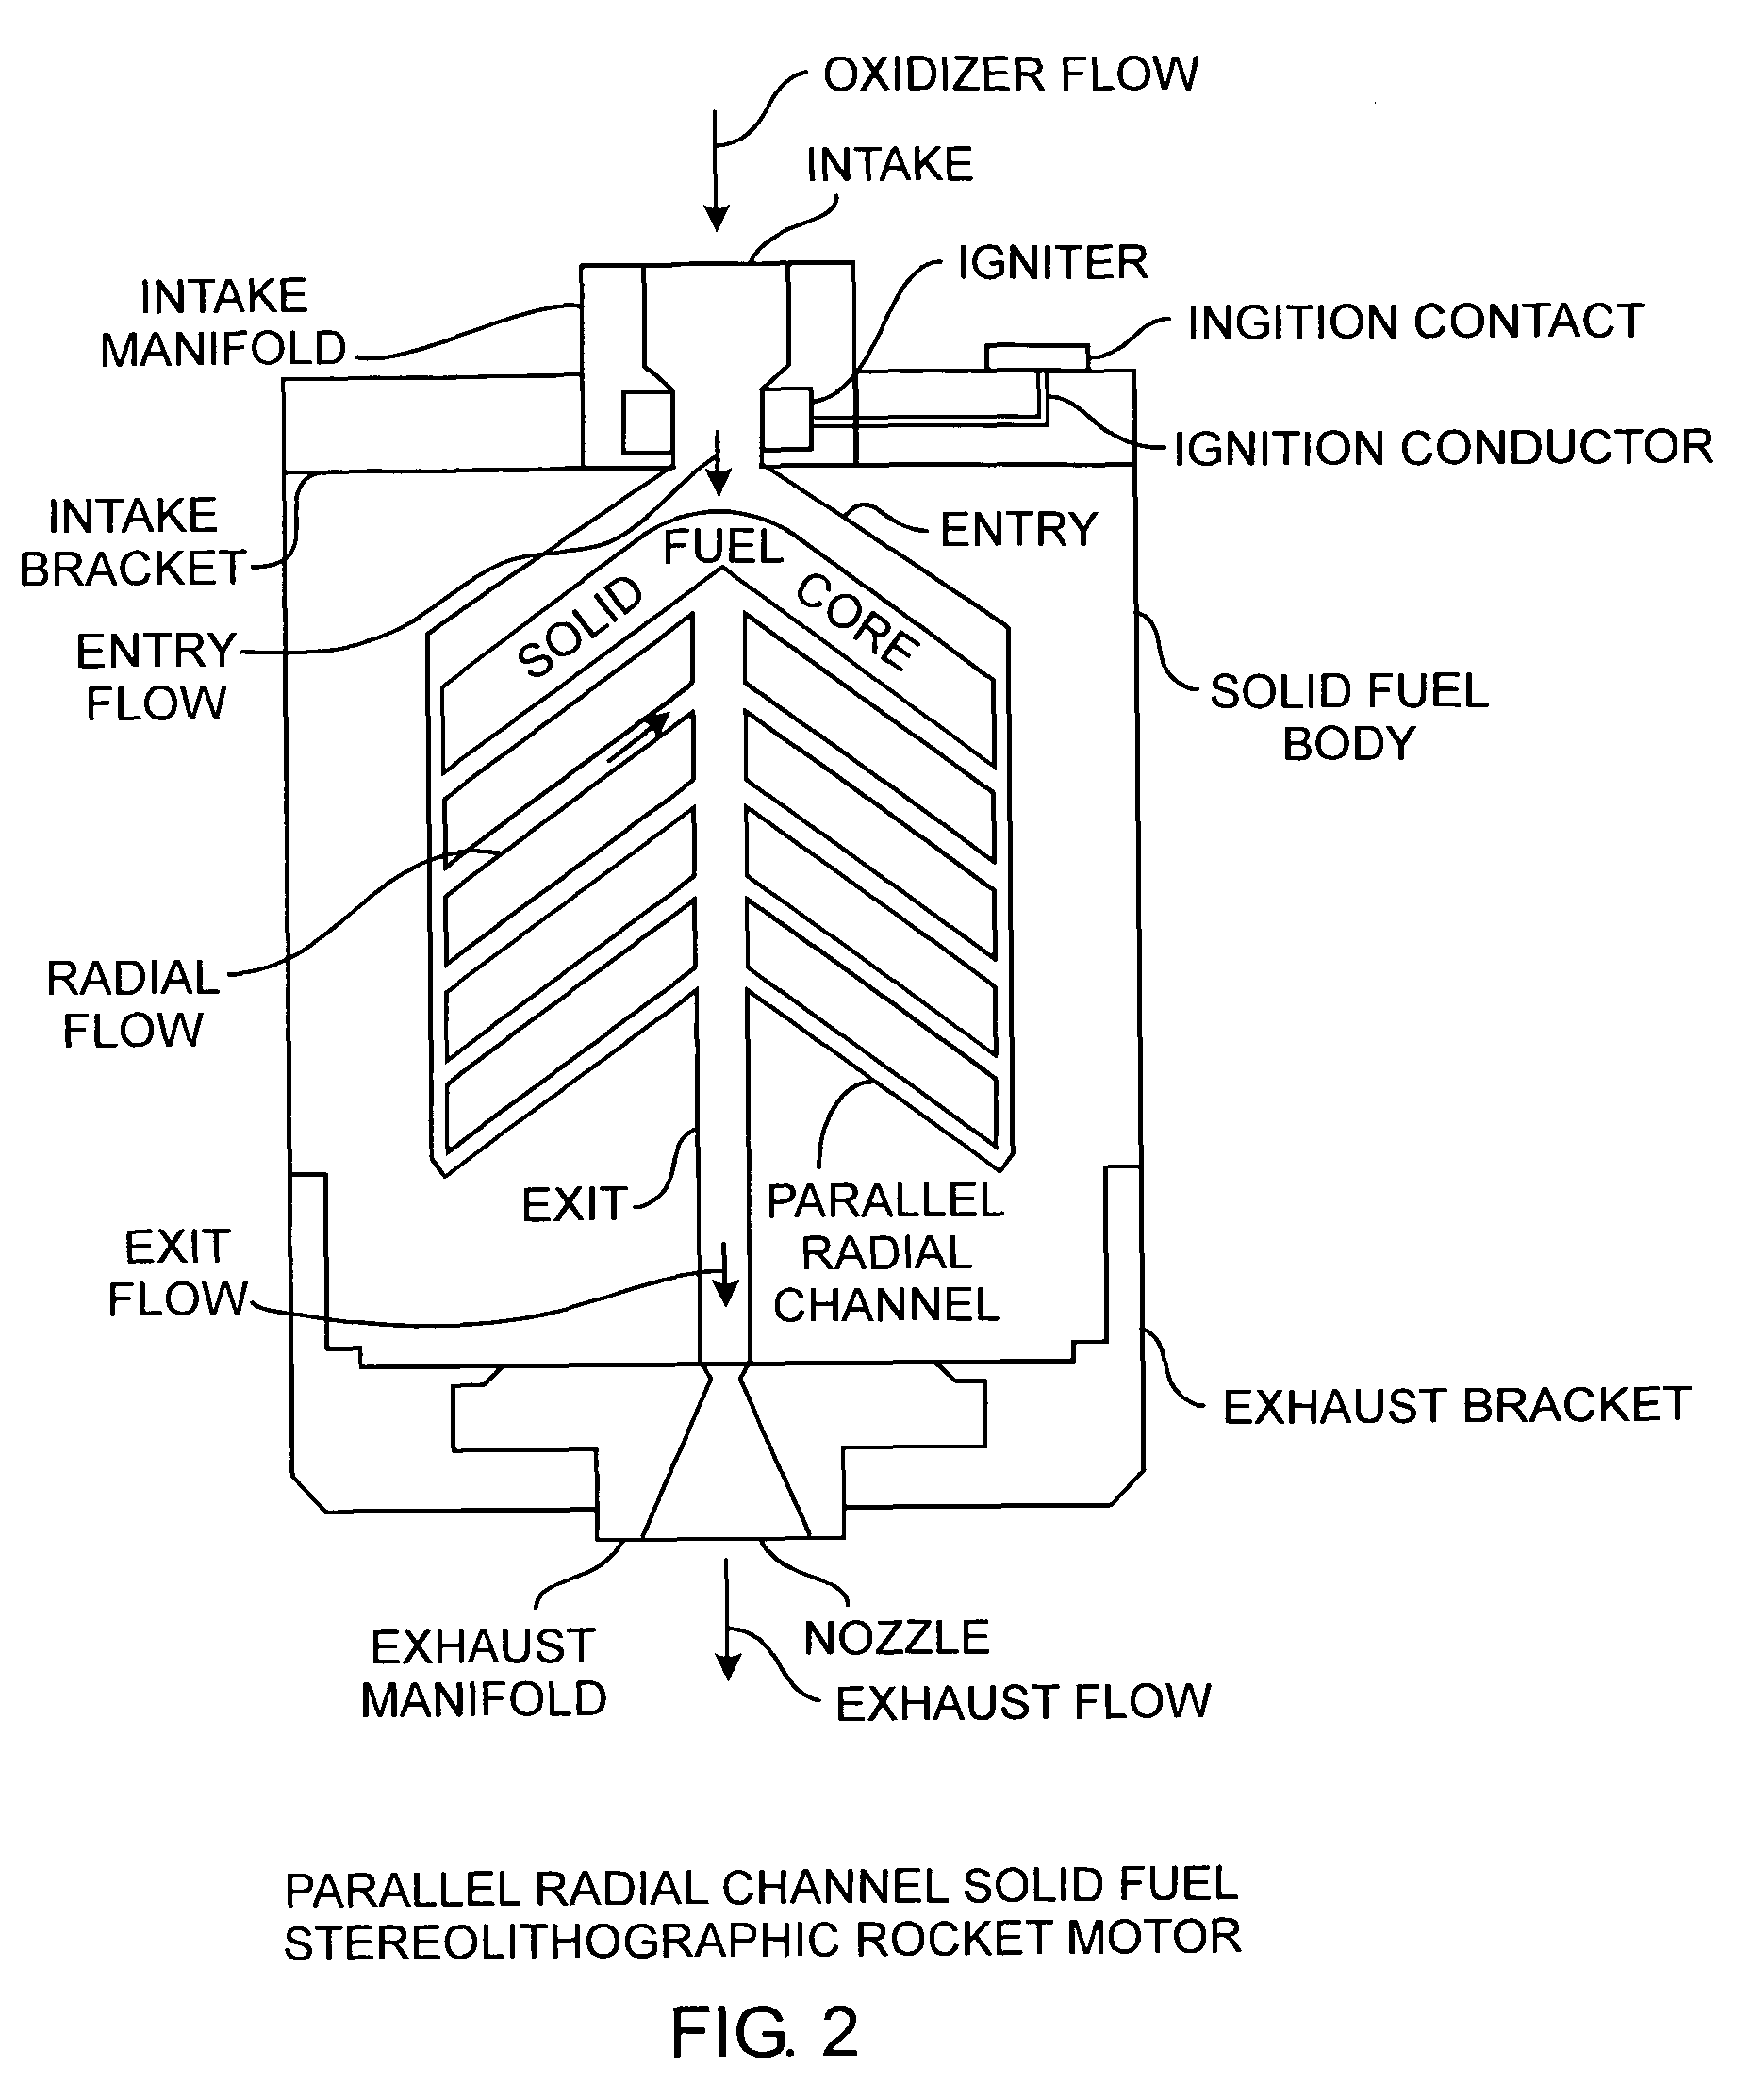 Stereolithographic rocket motor manufacturing method